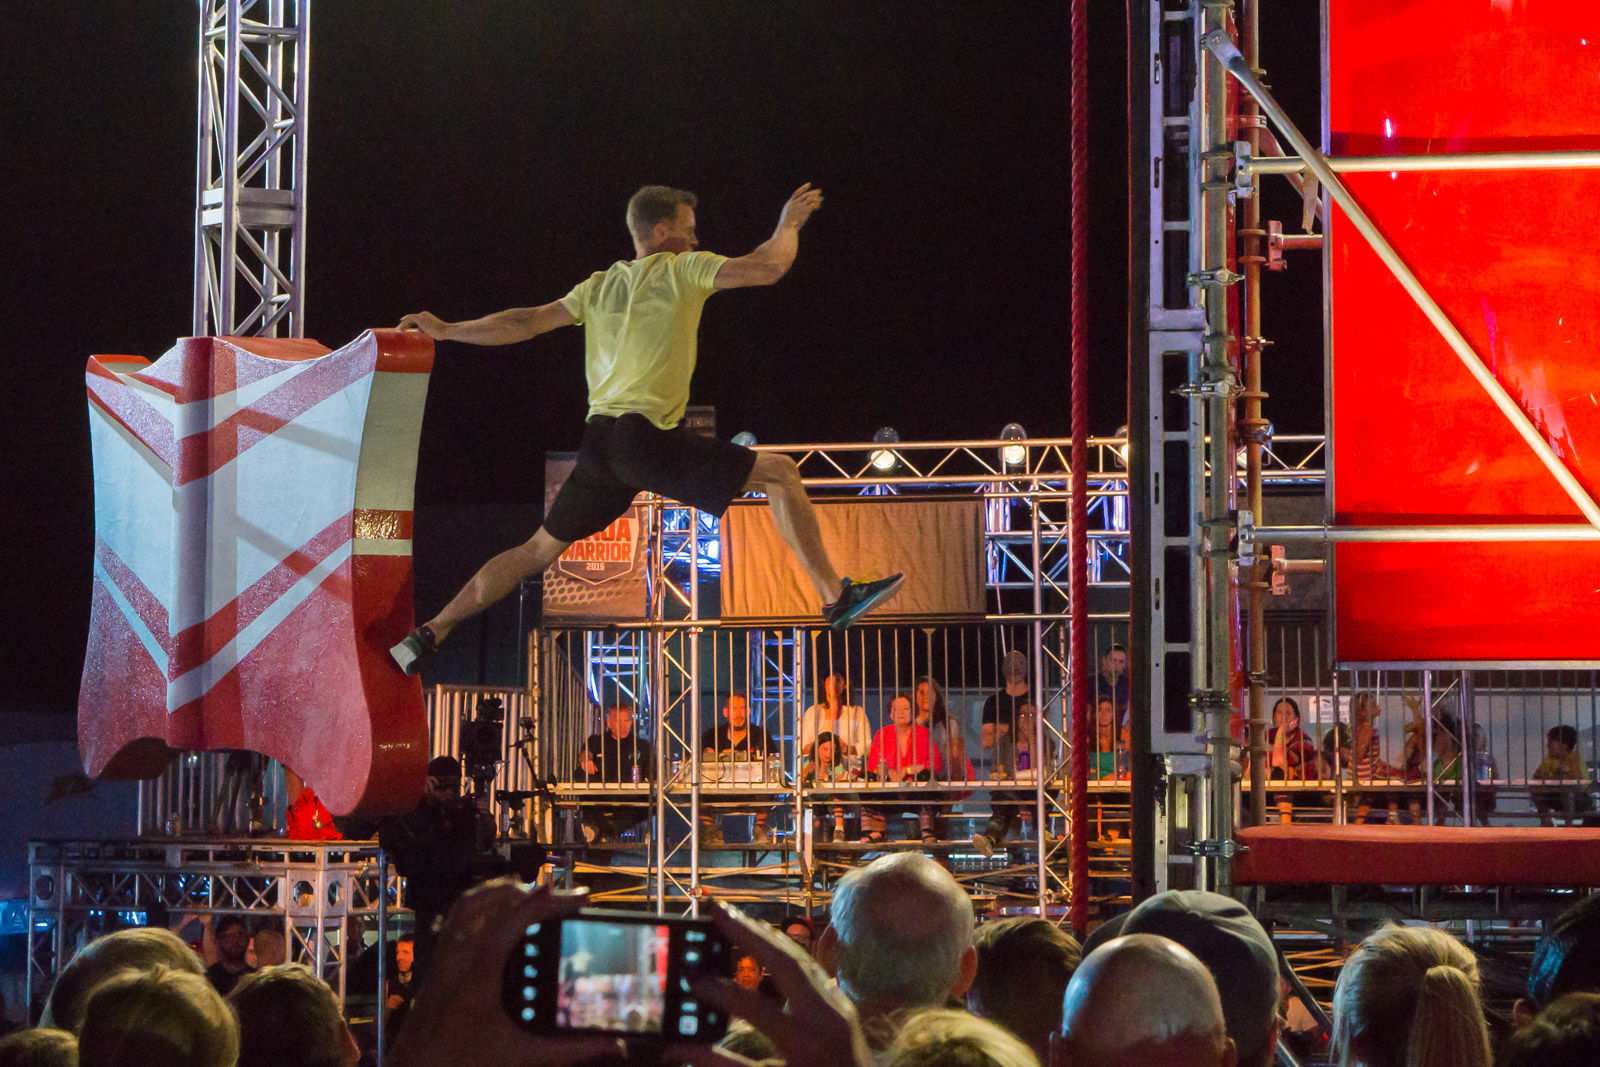 Geoff Britten leaps from one obstacle to the next during his in Season 7 of "American Ninja Warrior." (Photo courtesy of Geoff Britten)